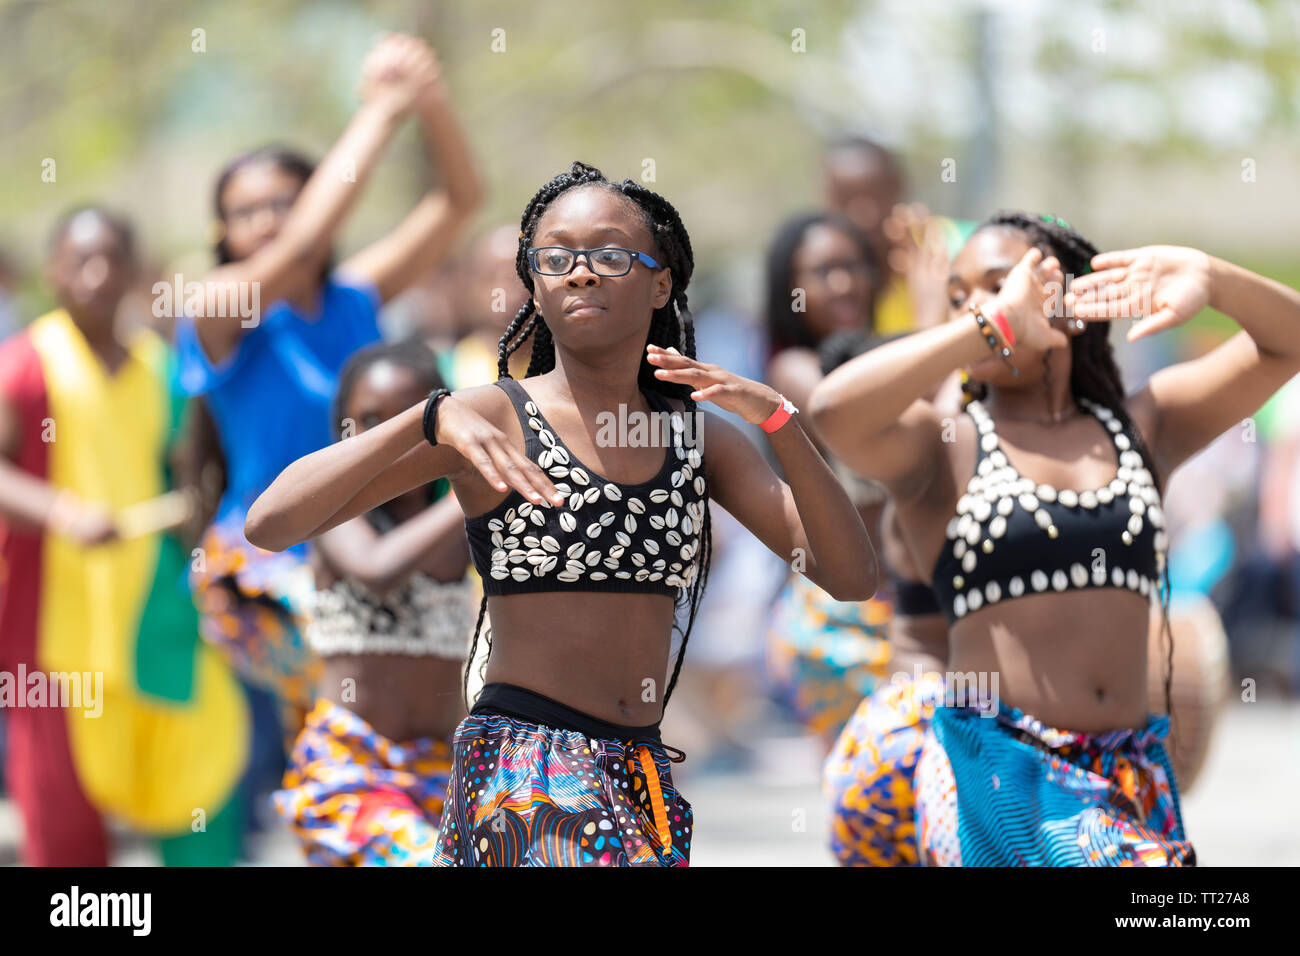 Cleveland, Ohio, USA - June 8, 2019: Parade the Circle, african ...